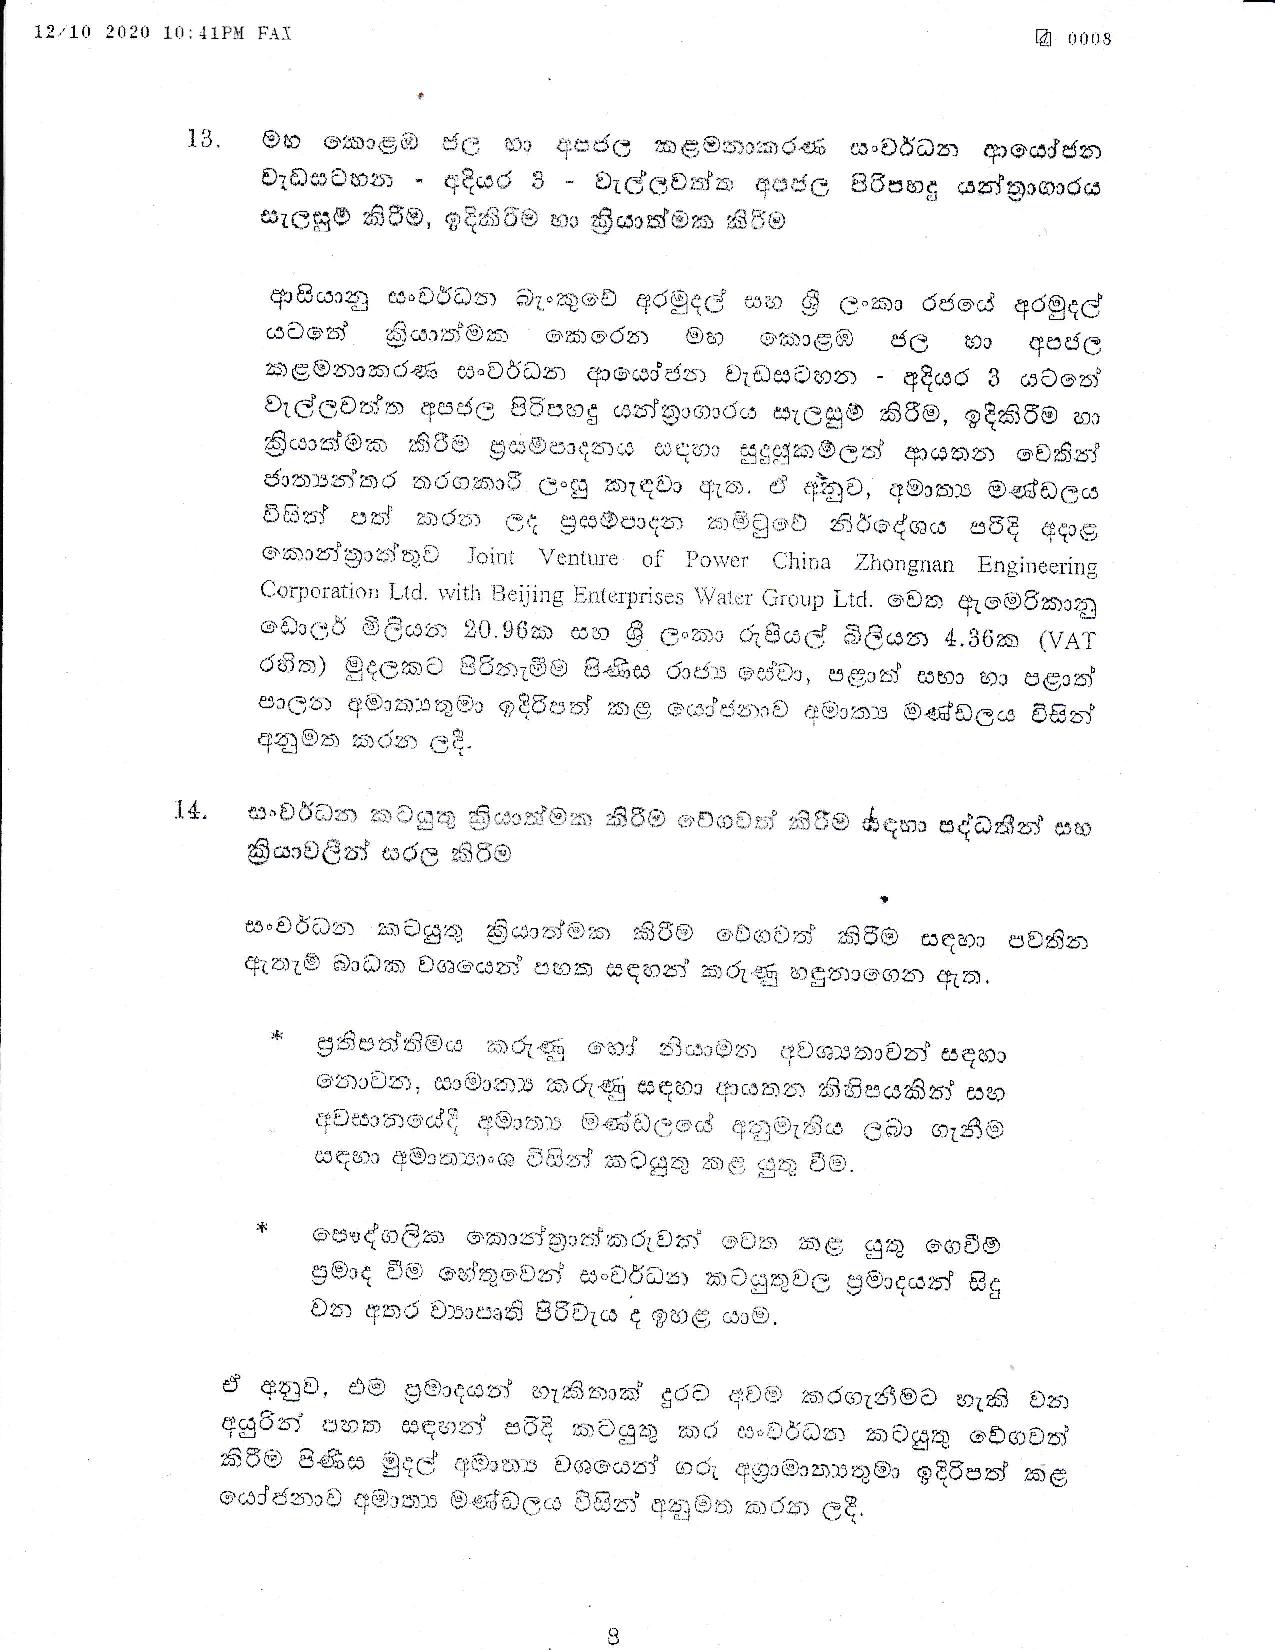 Cabinet Decision on 12.10.2020 page 008